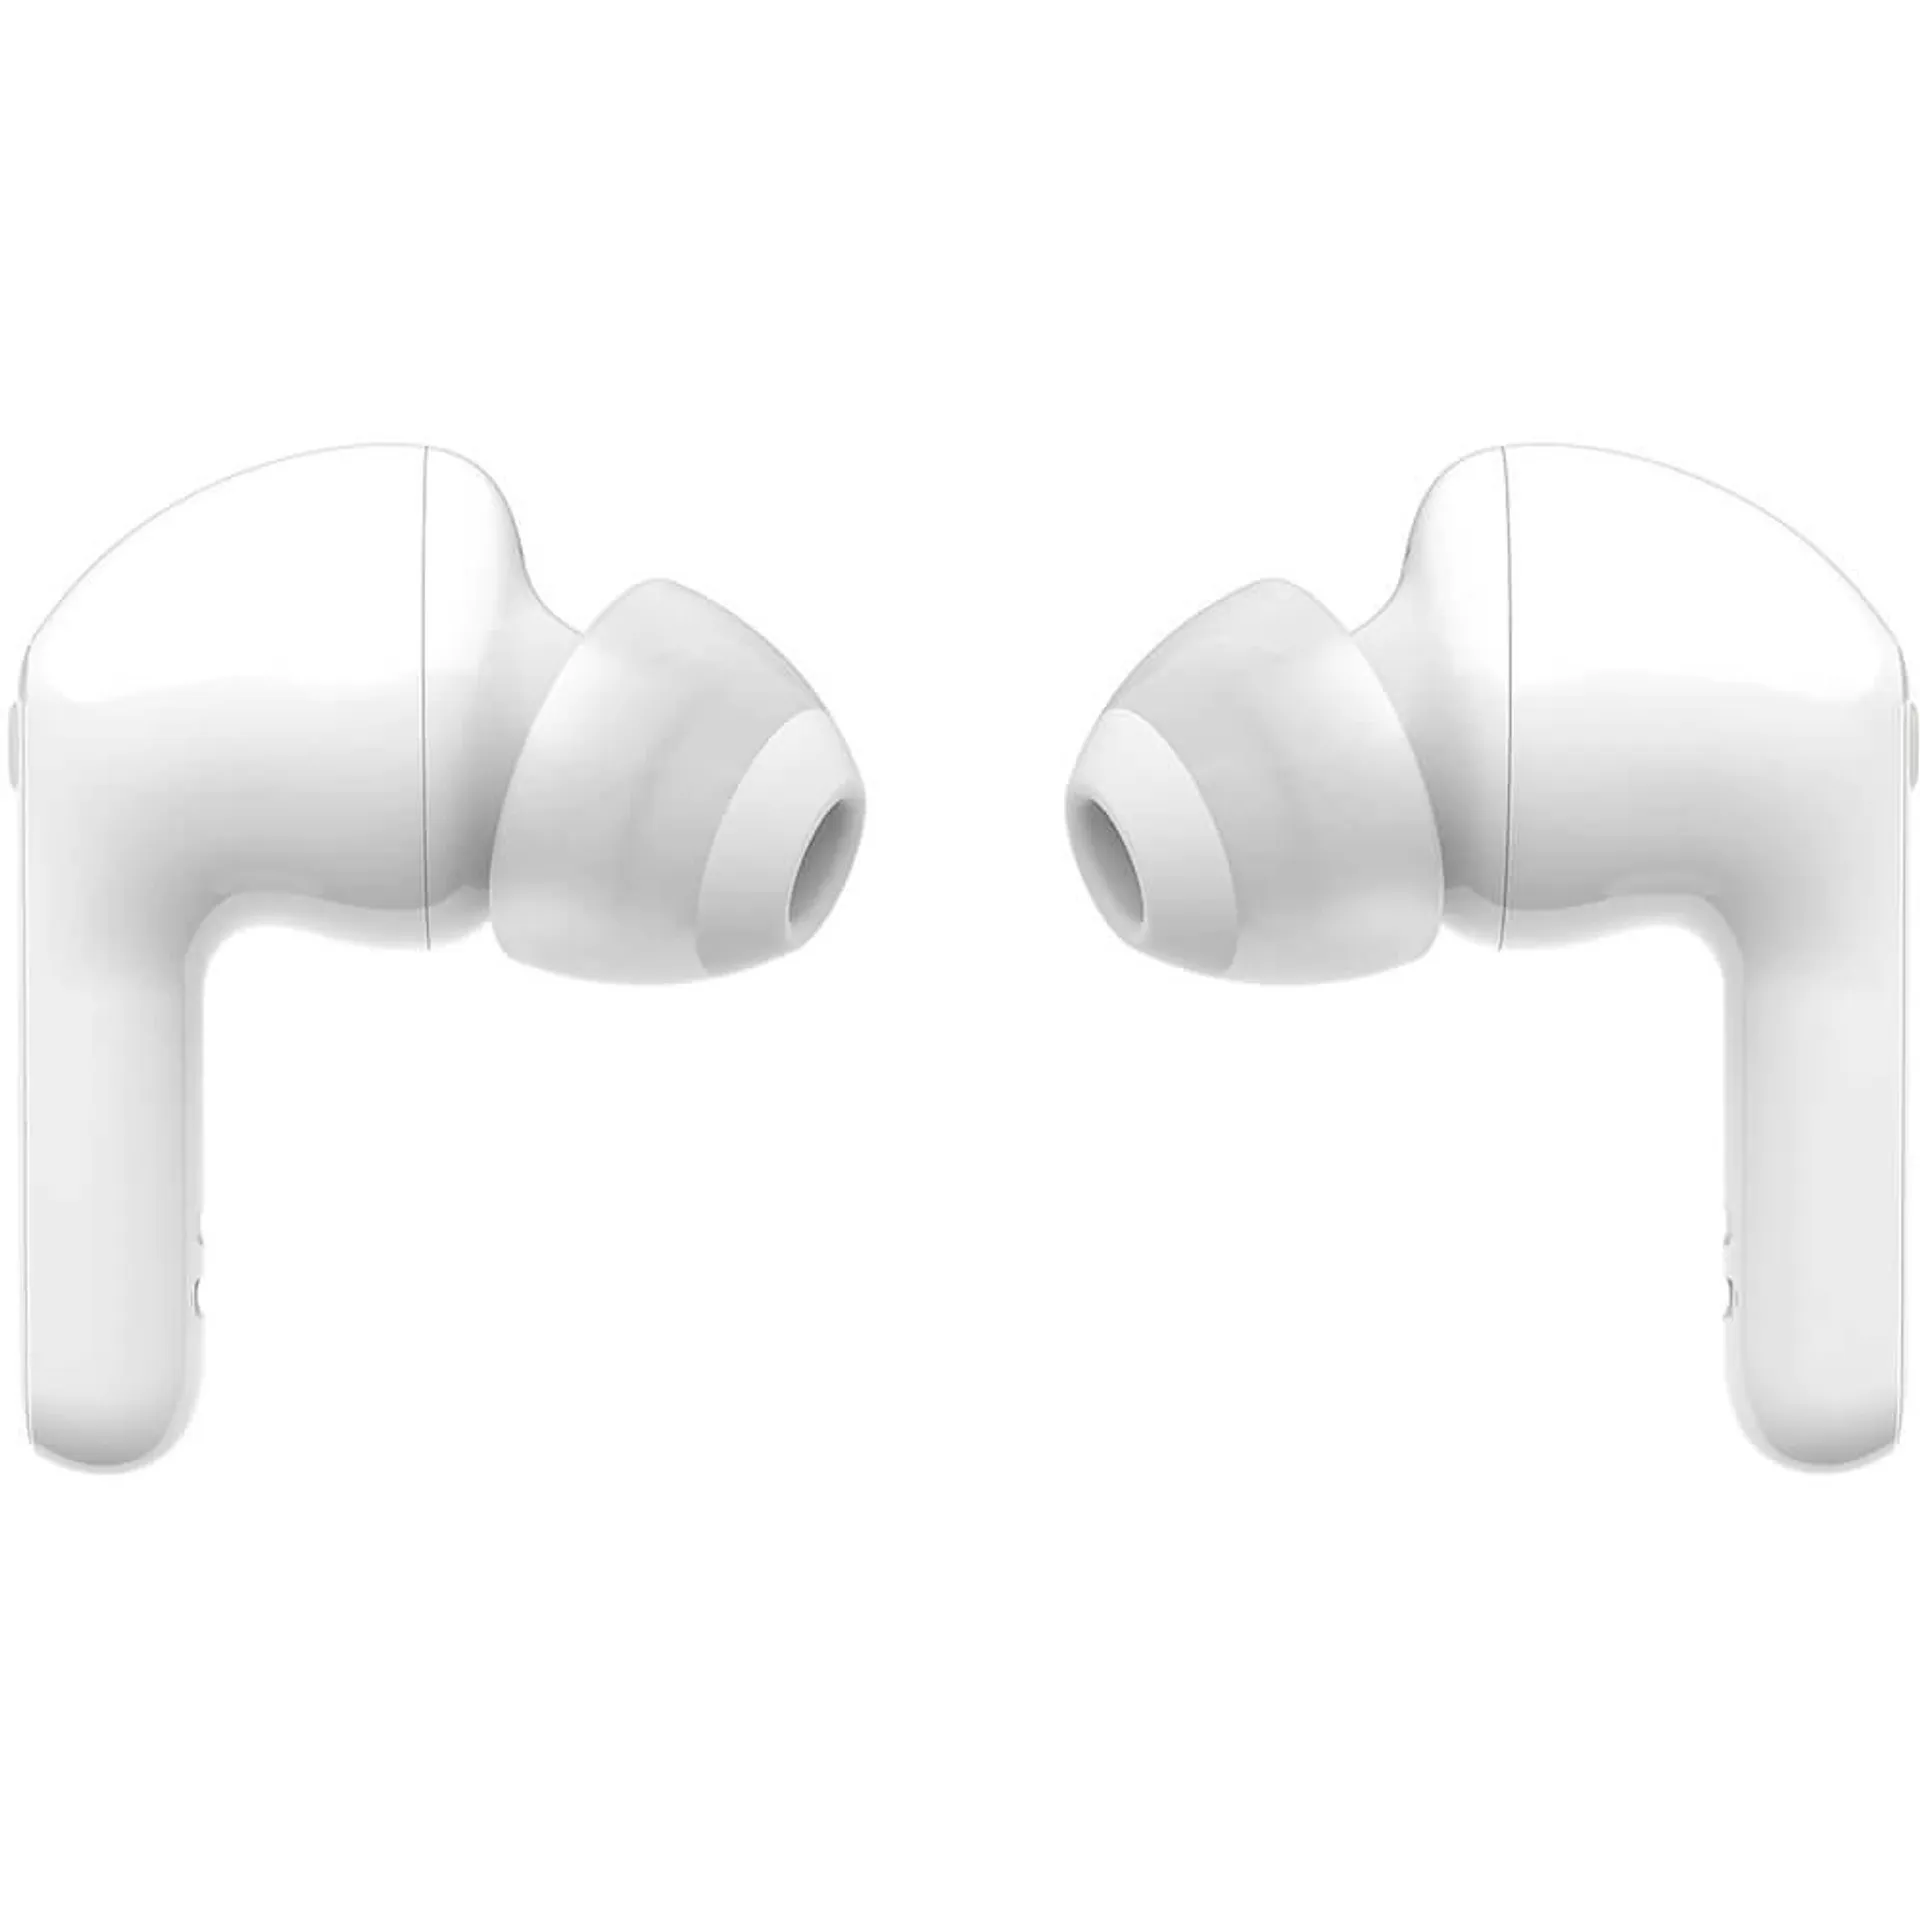 TONE Free Active Noise Cancellation Wireless Earbuds w/ Meridian Audio